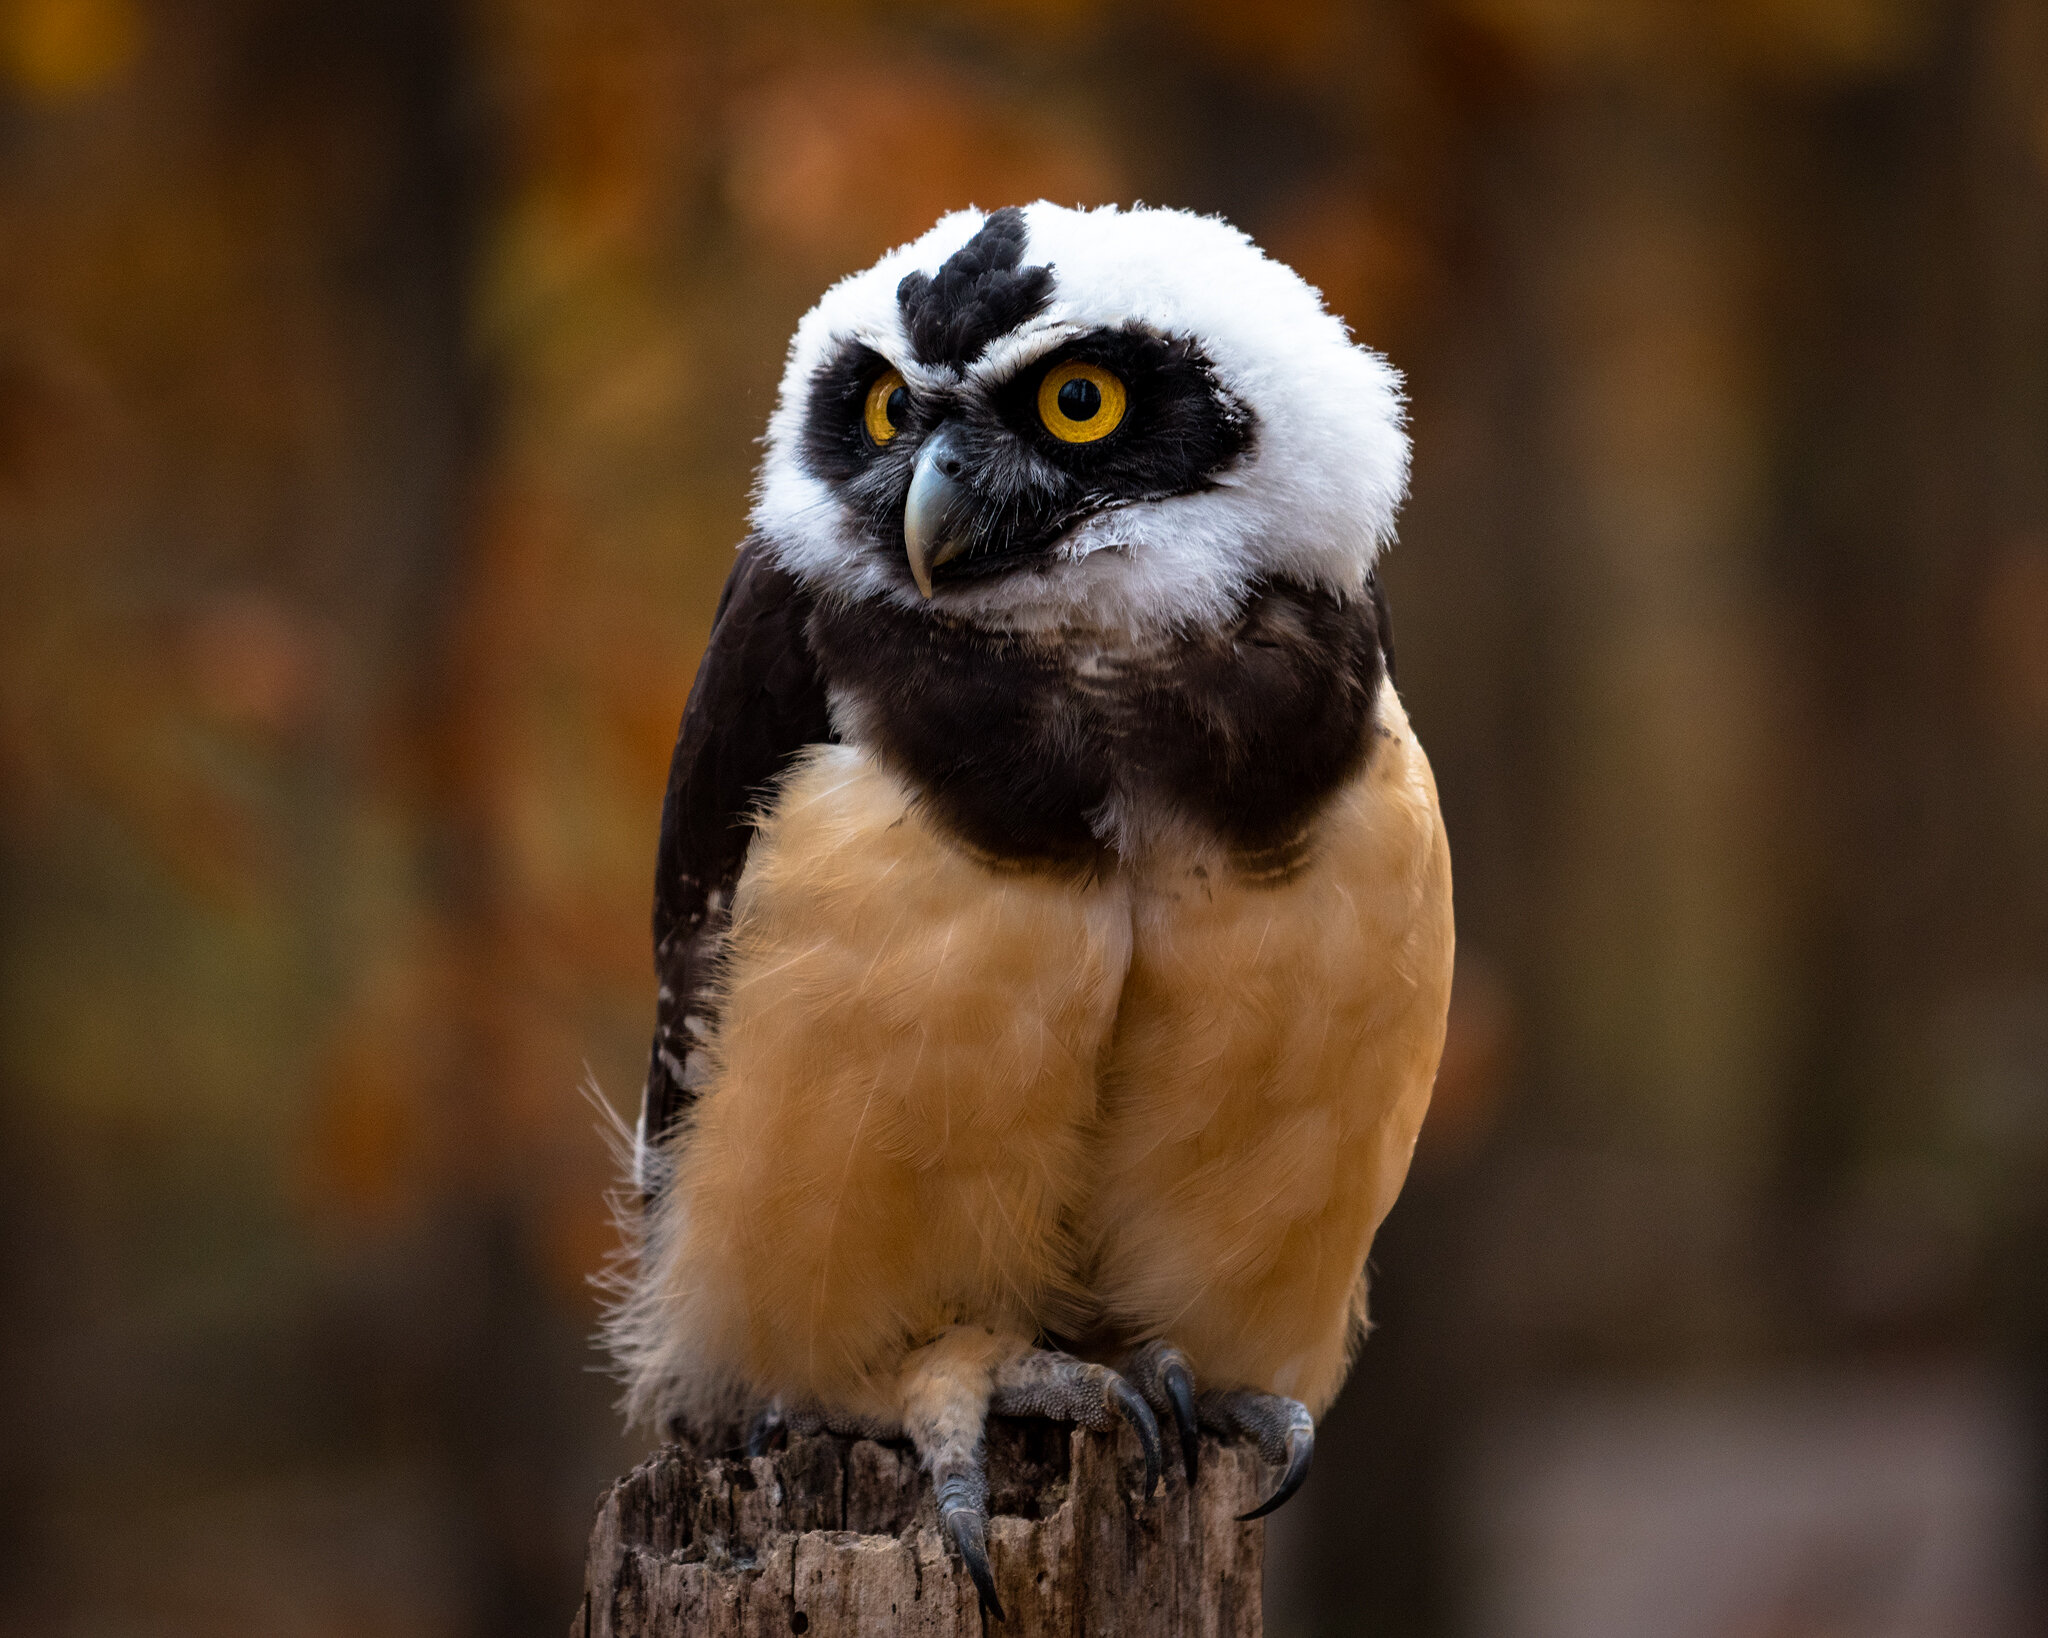 Juvenile Spectacled Owl